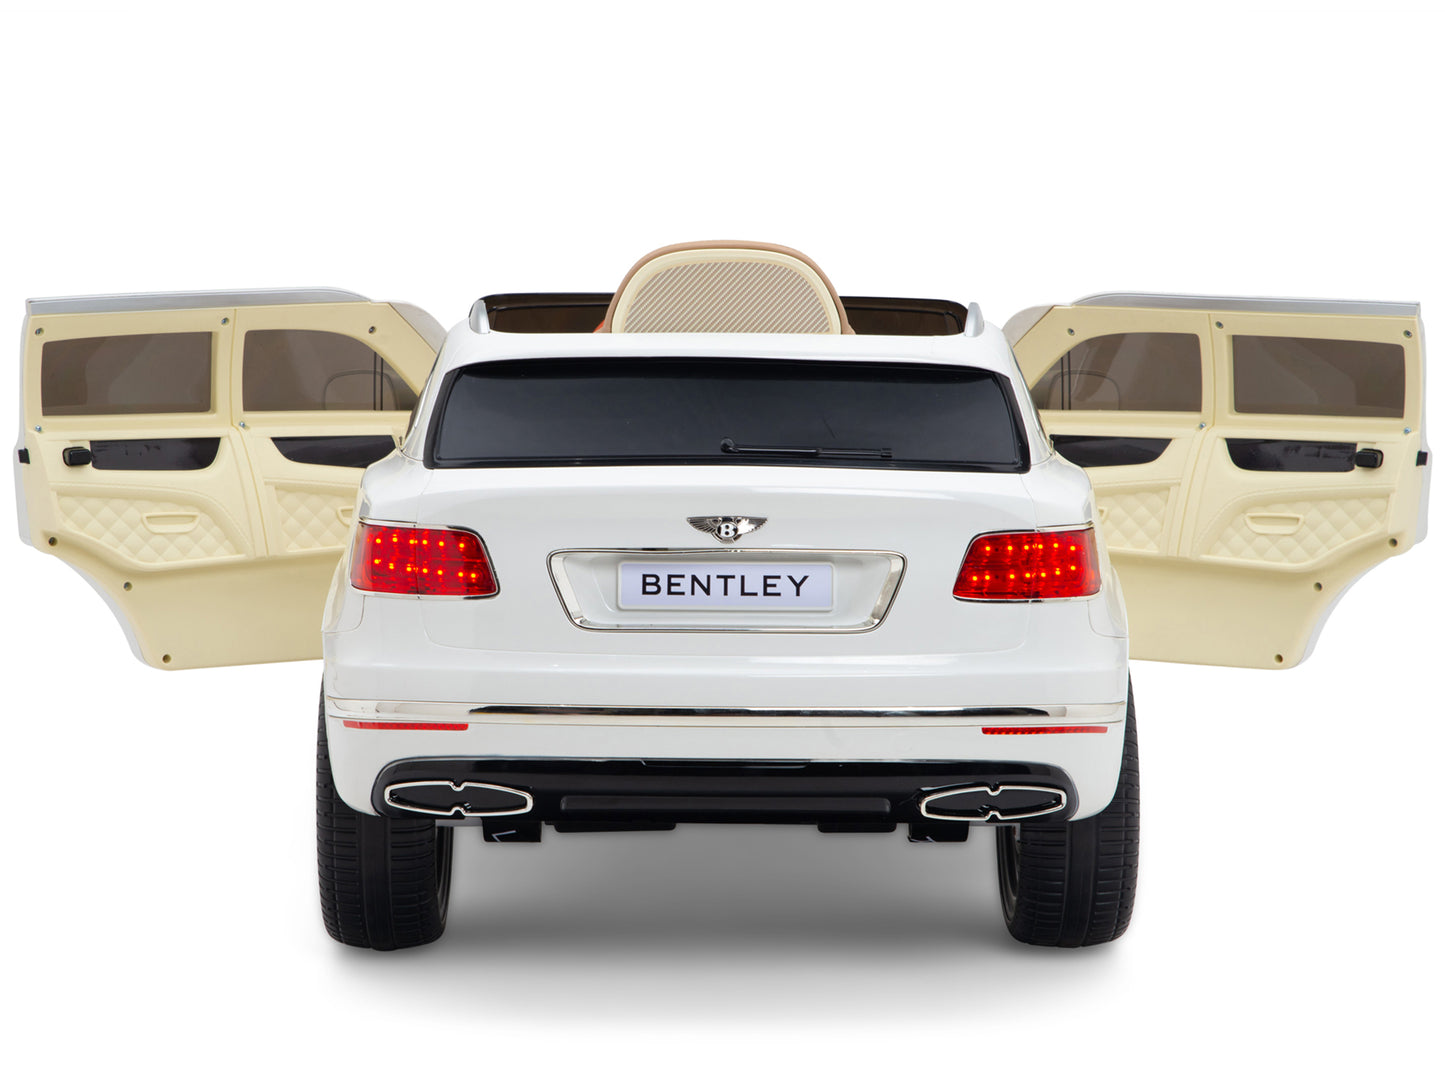 12V Bentley Bentayga Kids Electric Ride On Car/SUV with Remote - White